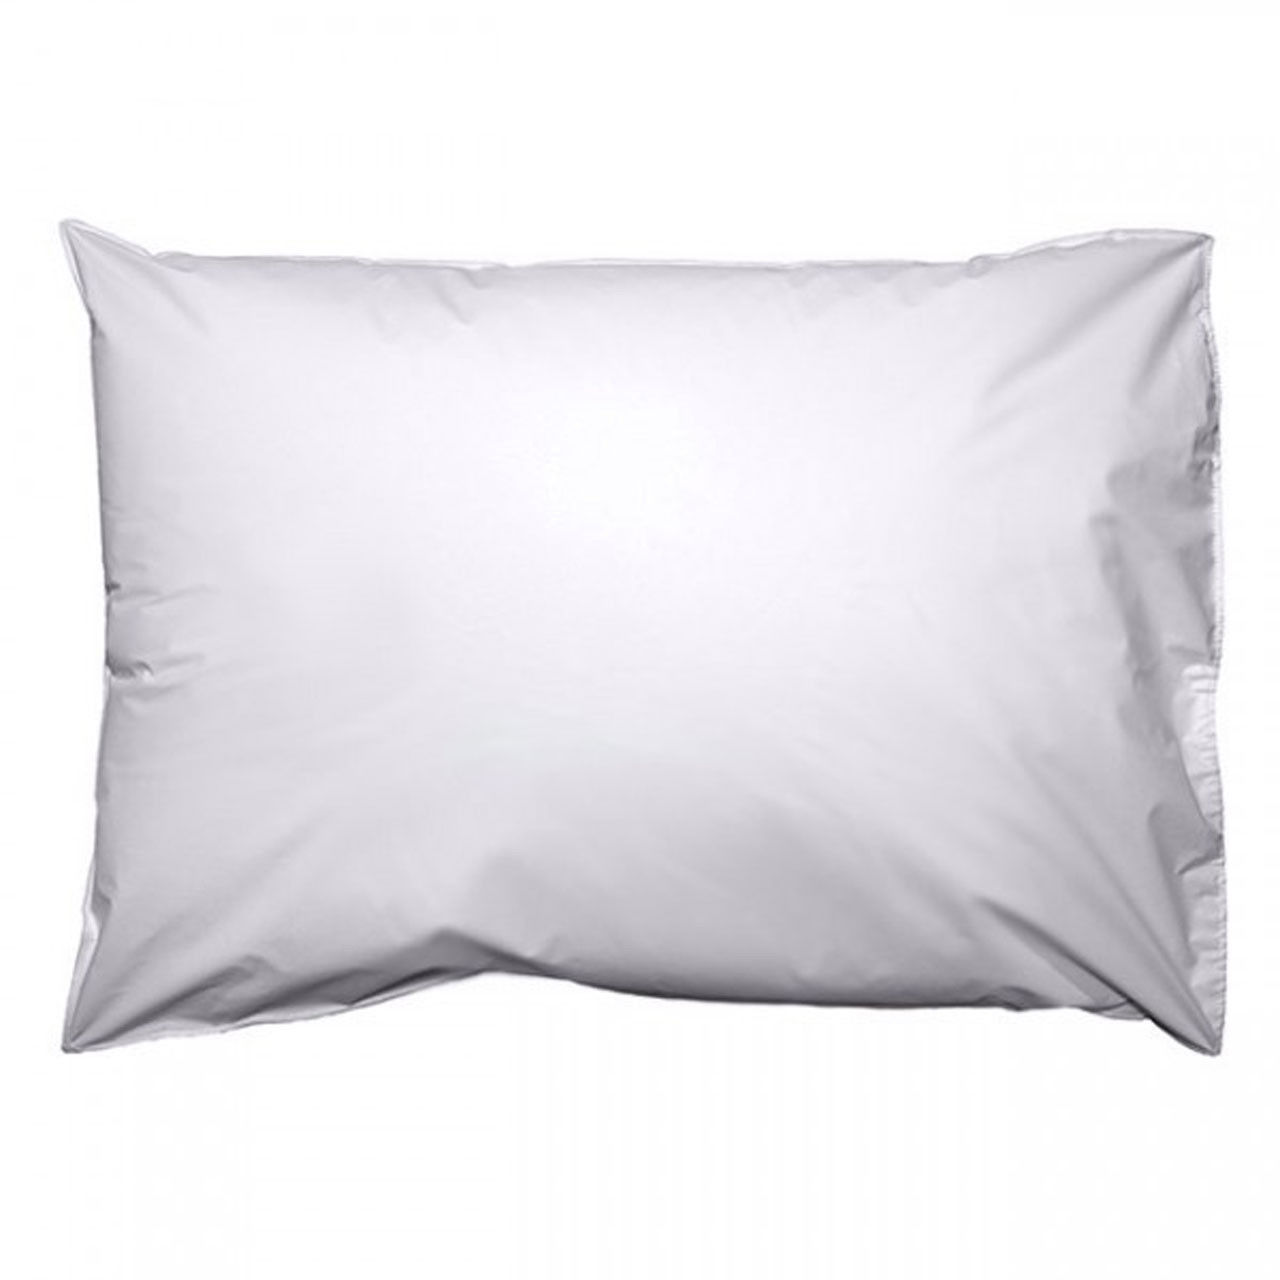 Why are wipeable pillows advantageous for the healthcare industry?